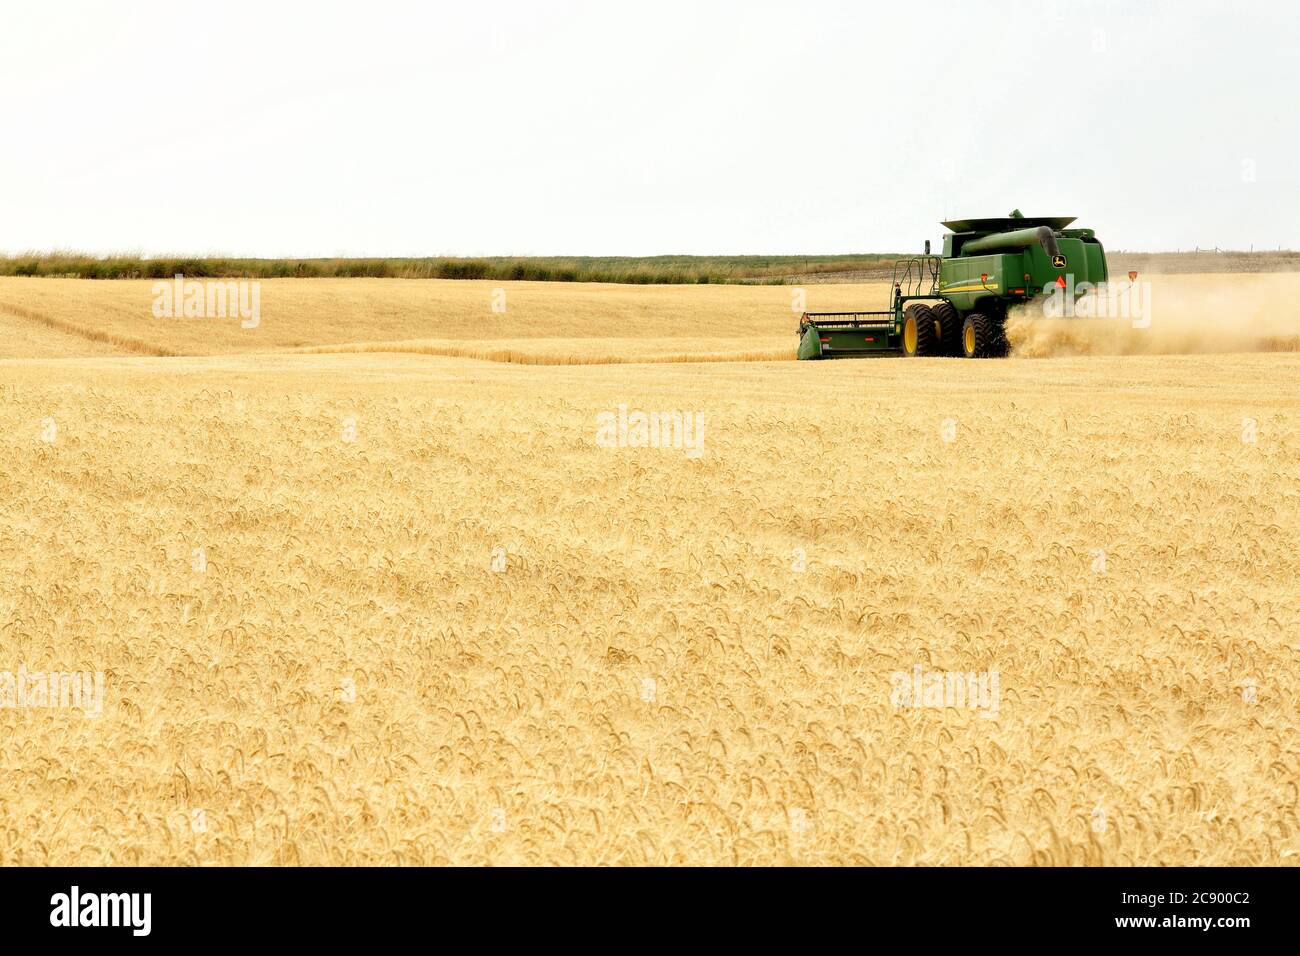 Grain combines cutting and  harvesting golden ripe wheat in the fertile farm fields of Idaho. Stock Photo